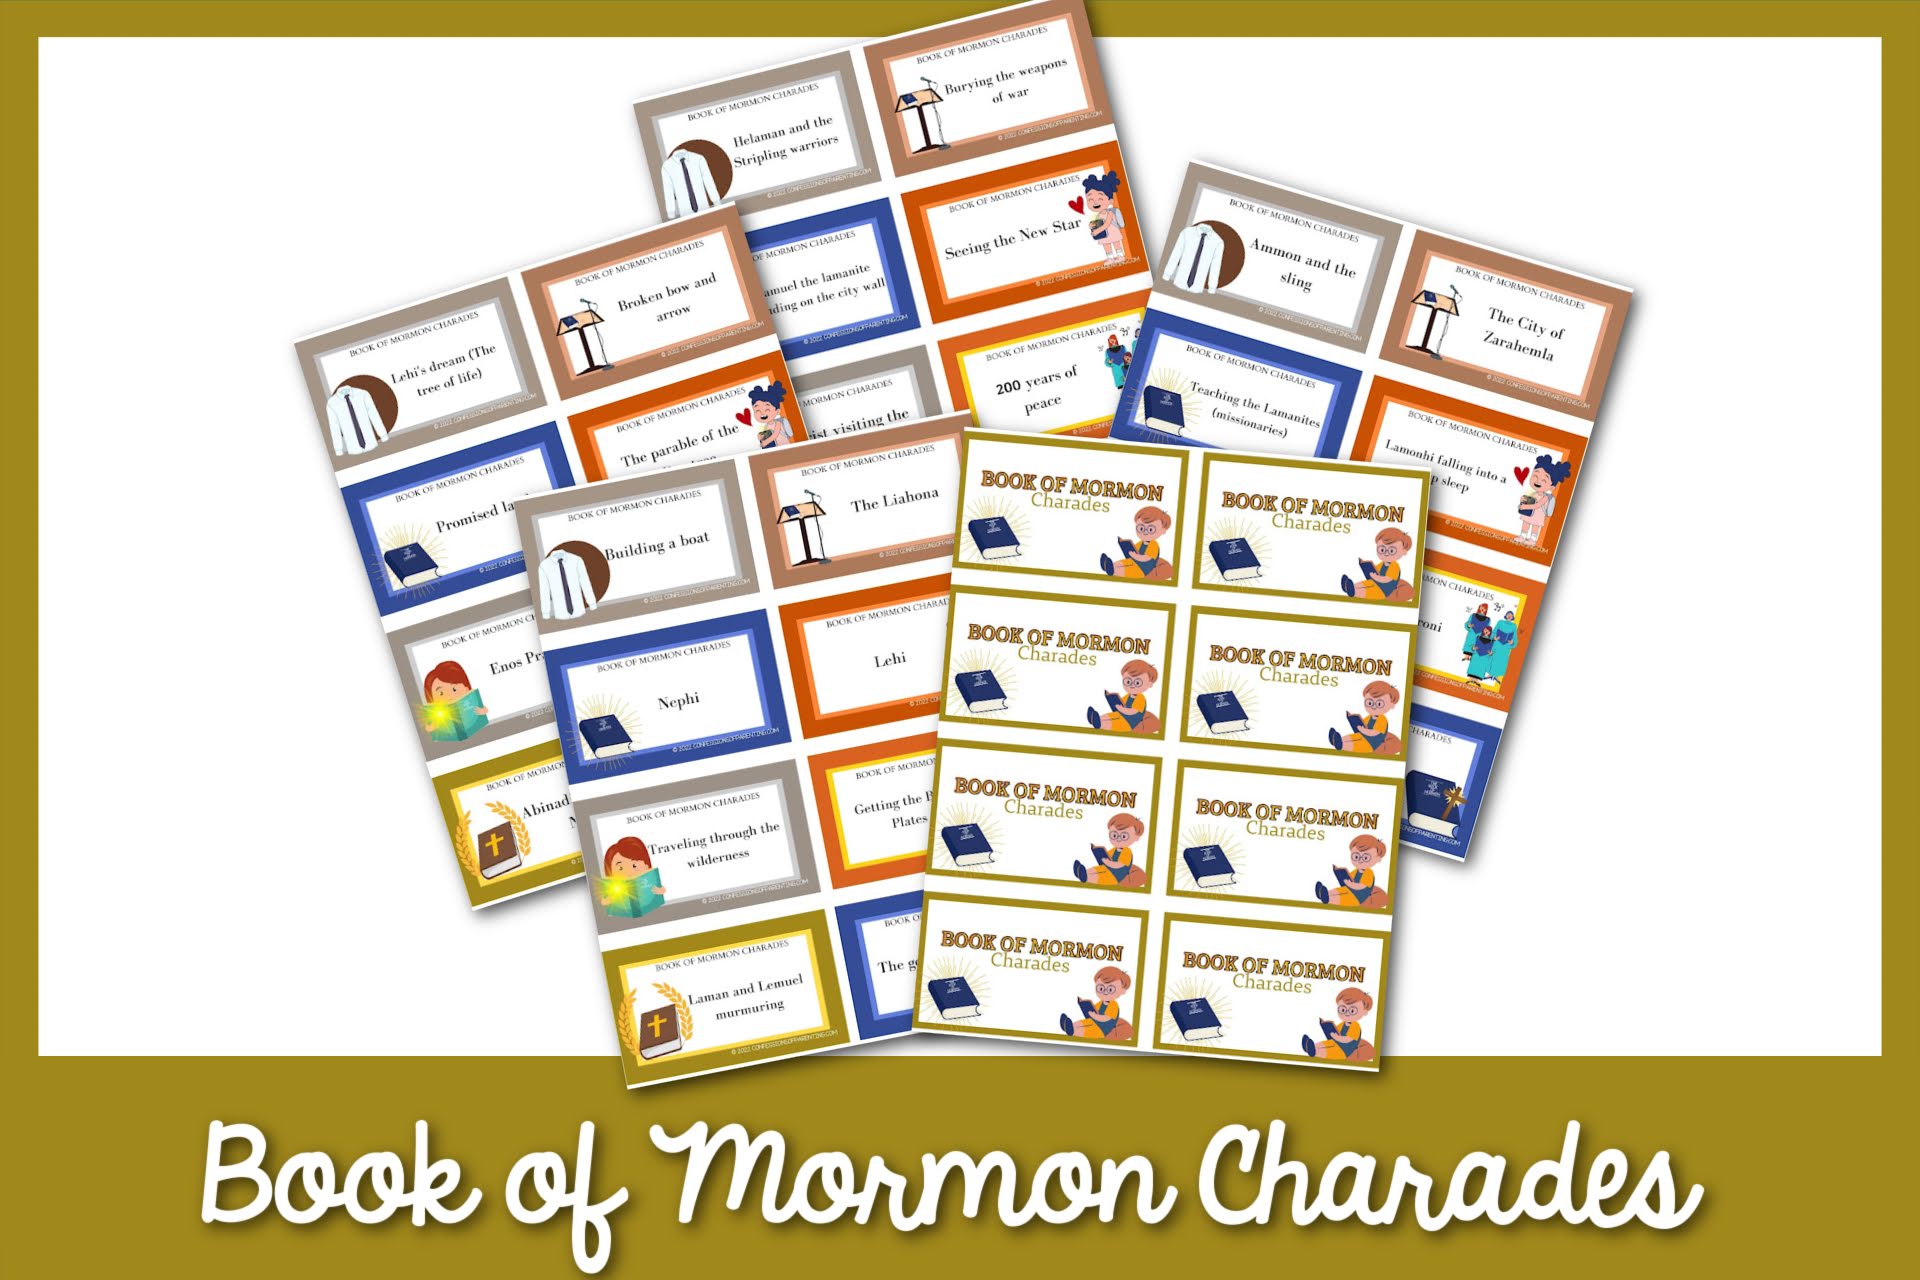 featured image: book of mormon charades on a yellow background